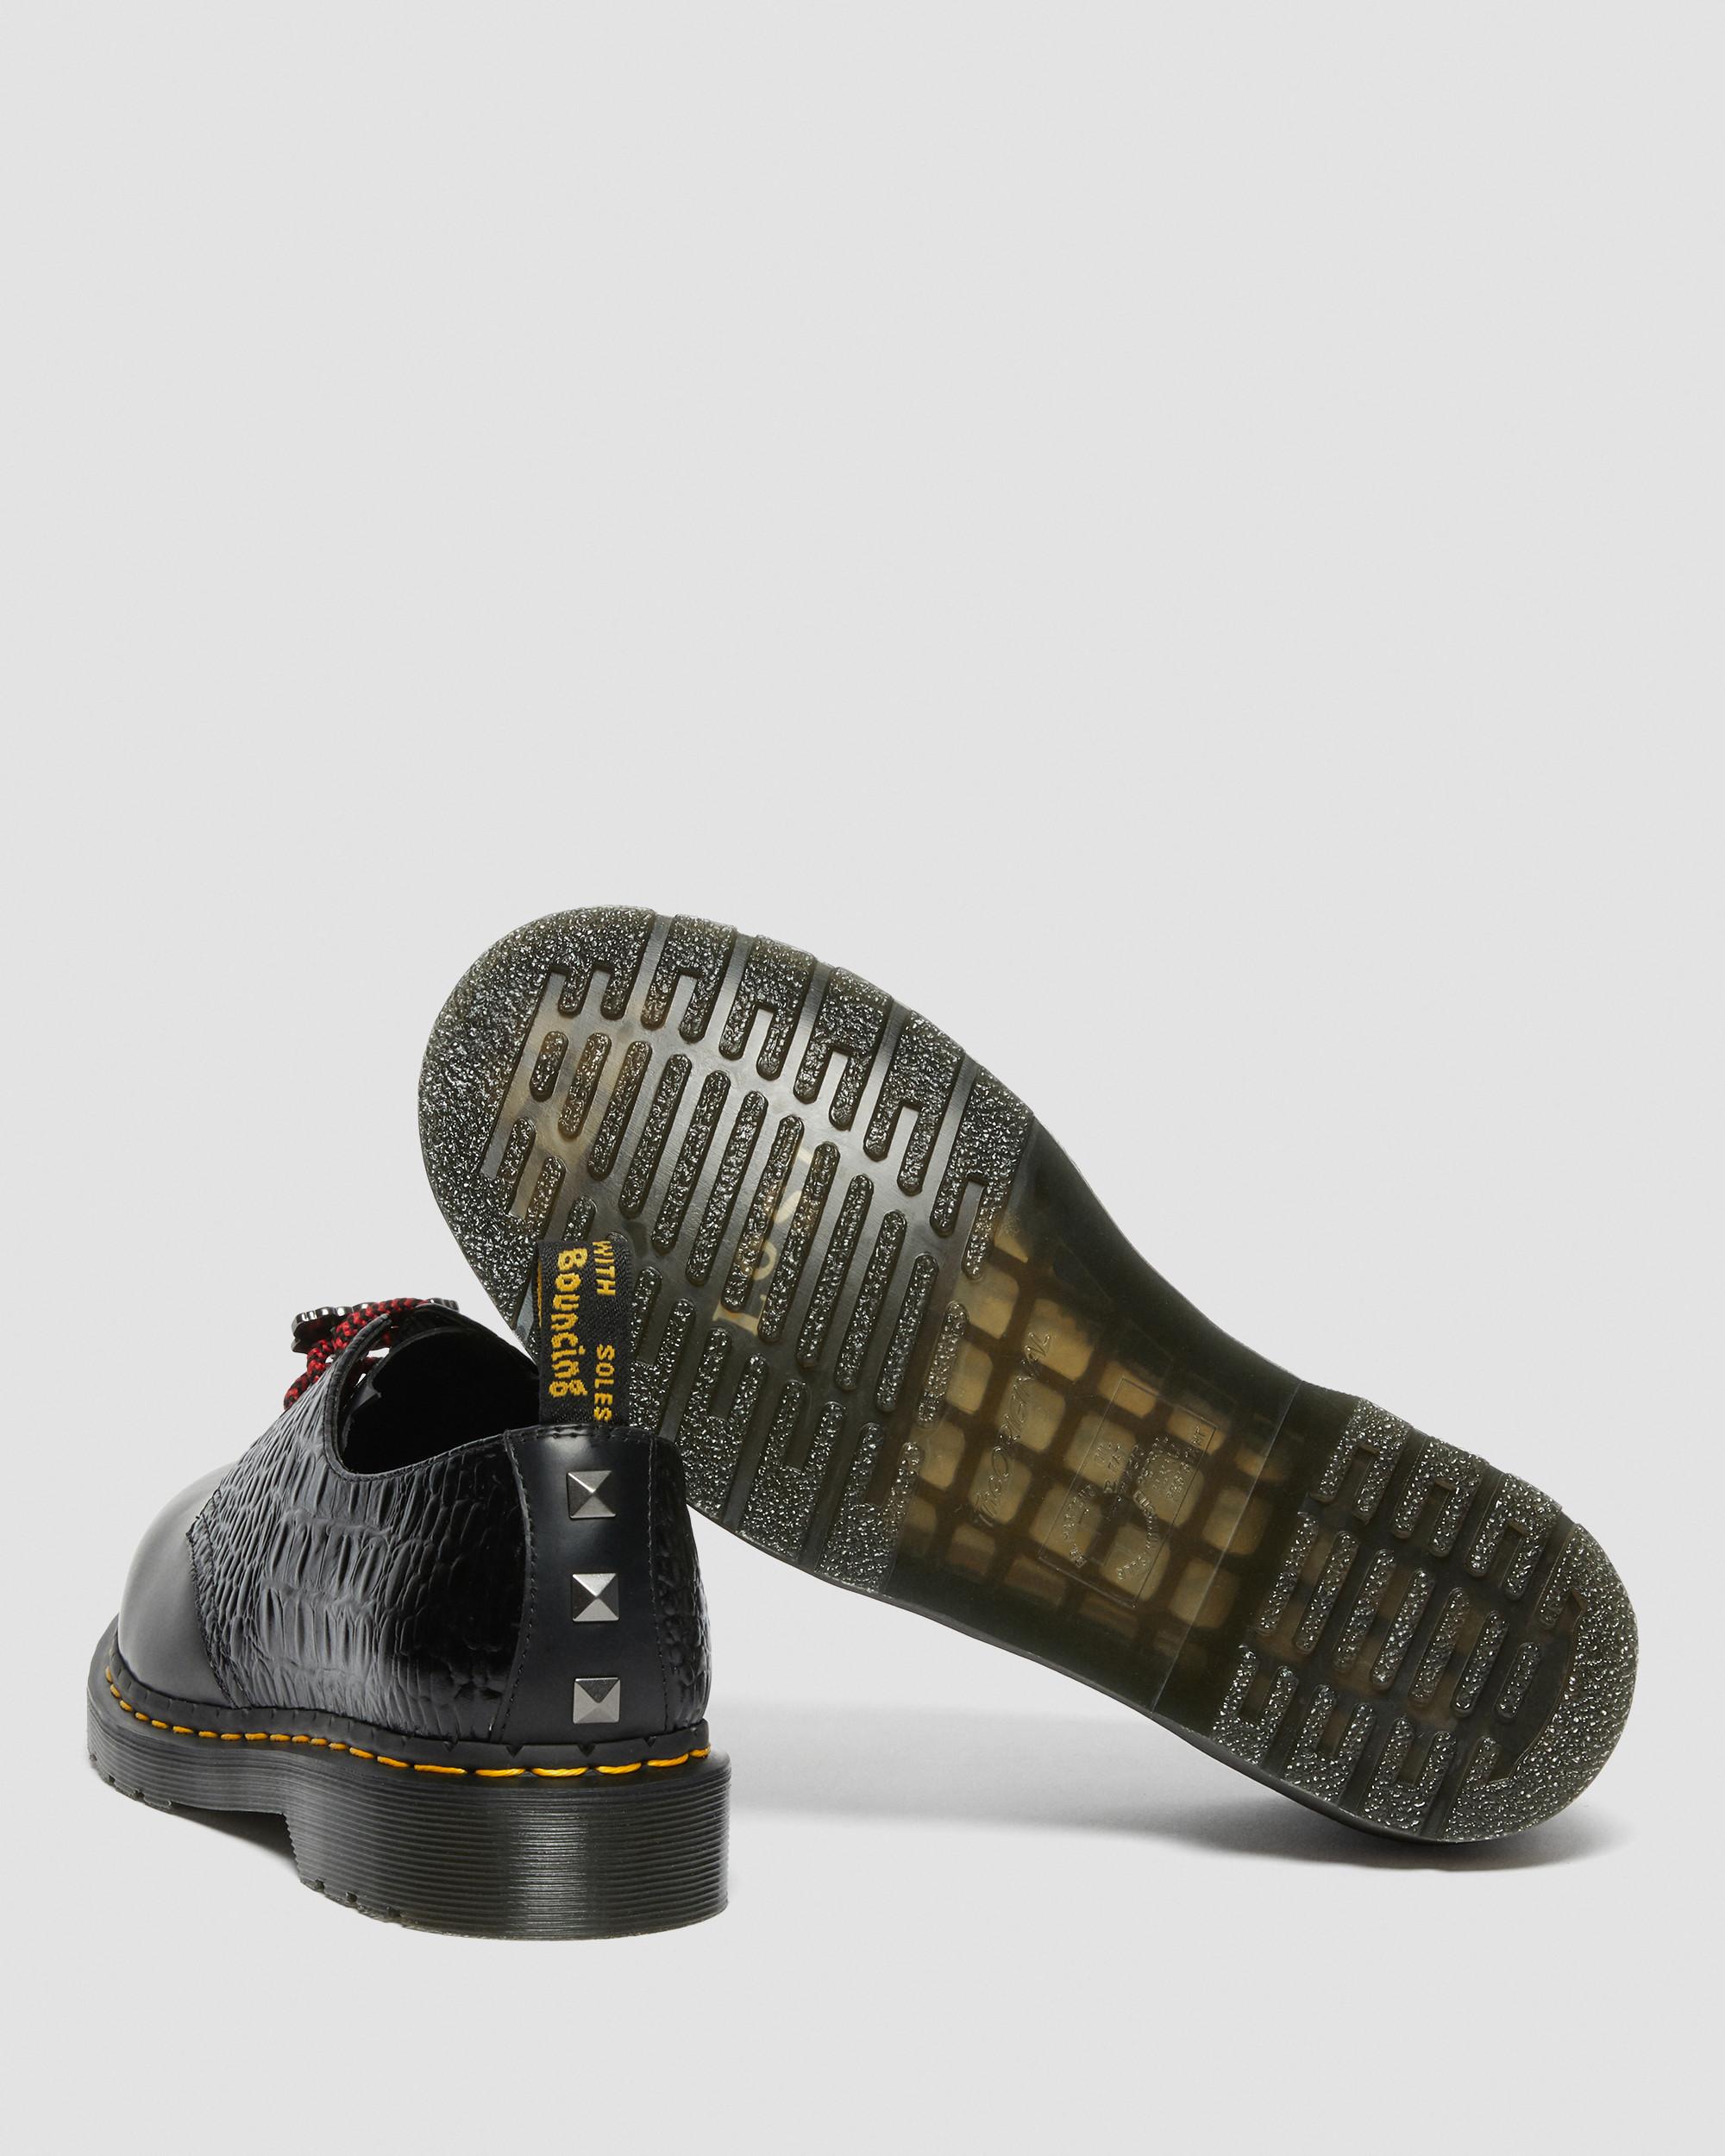 1461 WB Lost Boys Leather Oxford Shoes | Dr. Martens